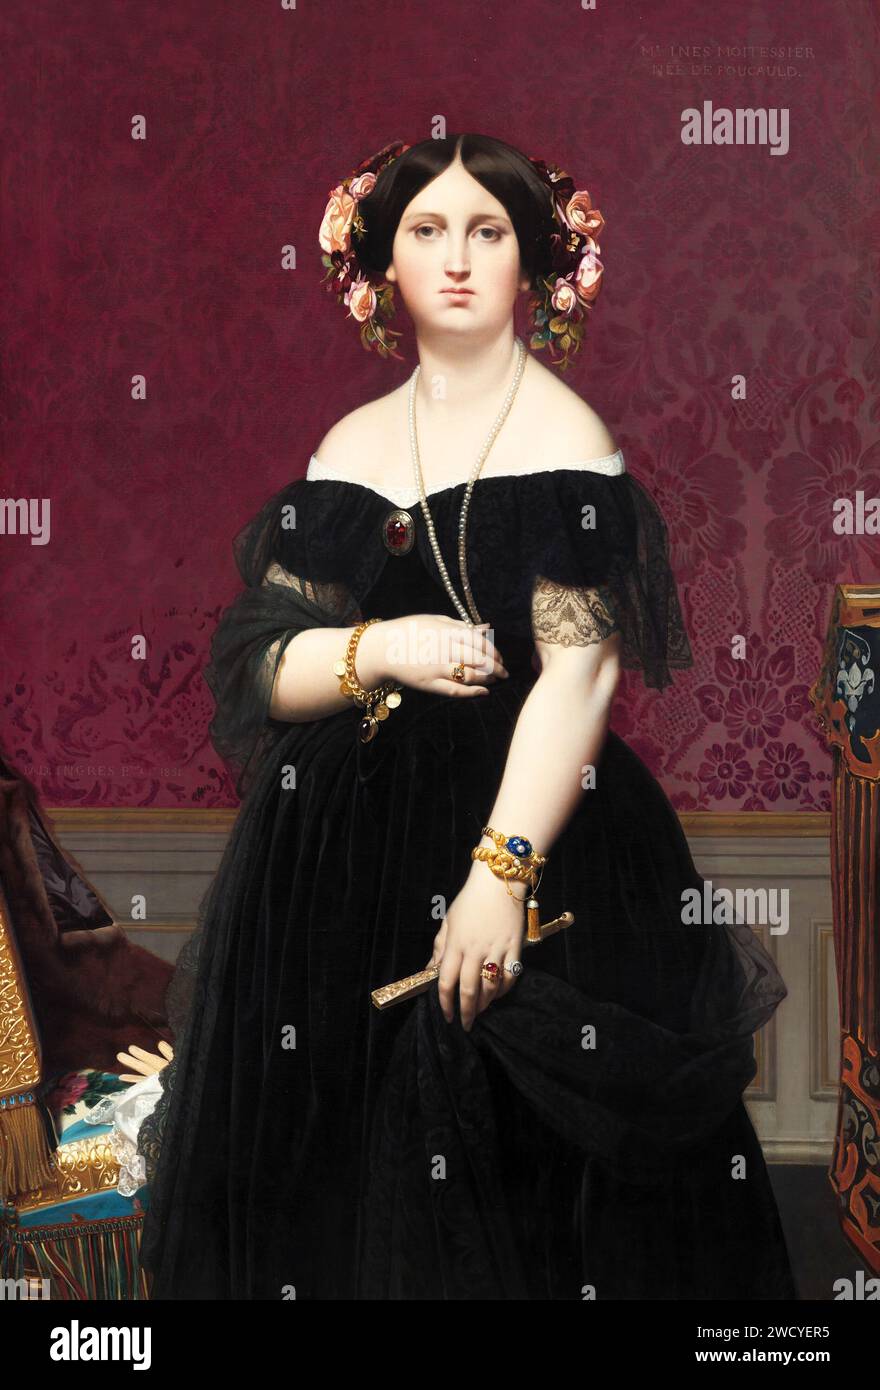 Madame Moitessier (1851) by Jean-Auguste-Dominique Ingres . Stock Photo